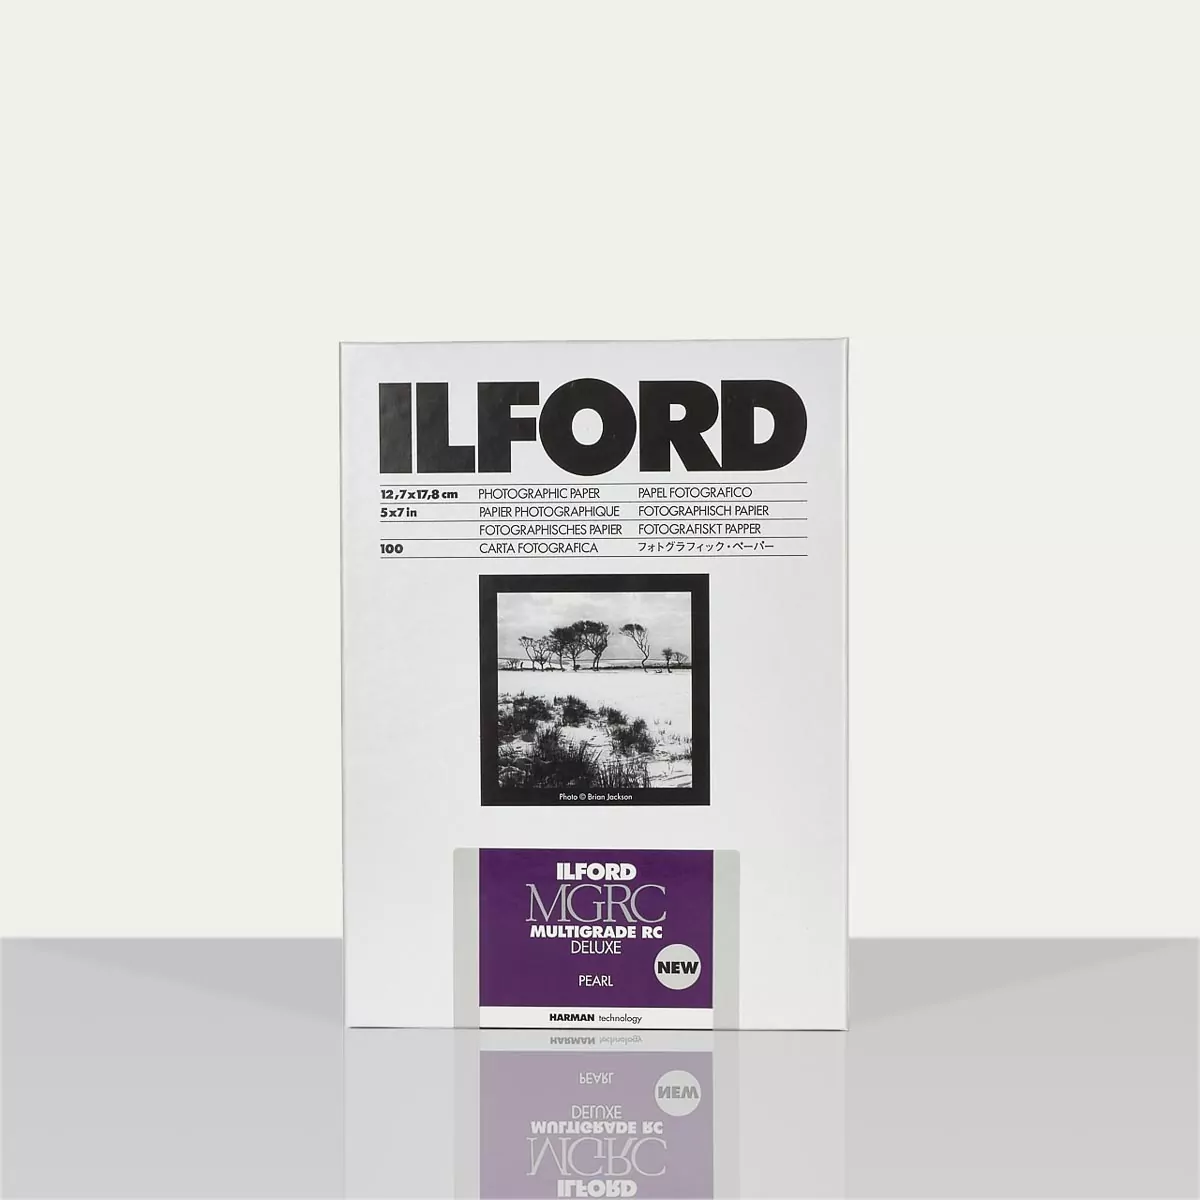 ILFORD MULTIGRADE RC DELUXE MGRCDL44M 12.7×17.8cm (100 sheets)